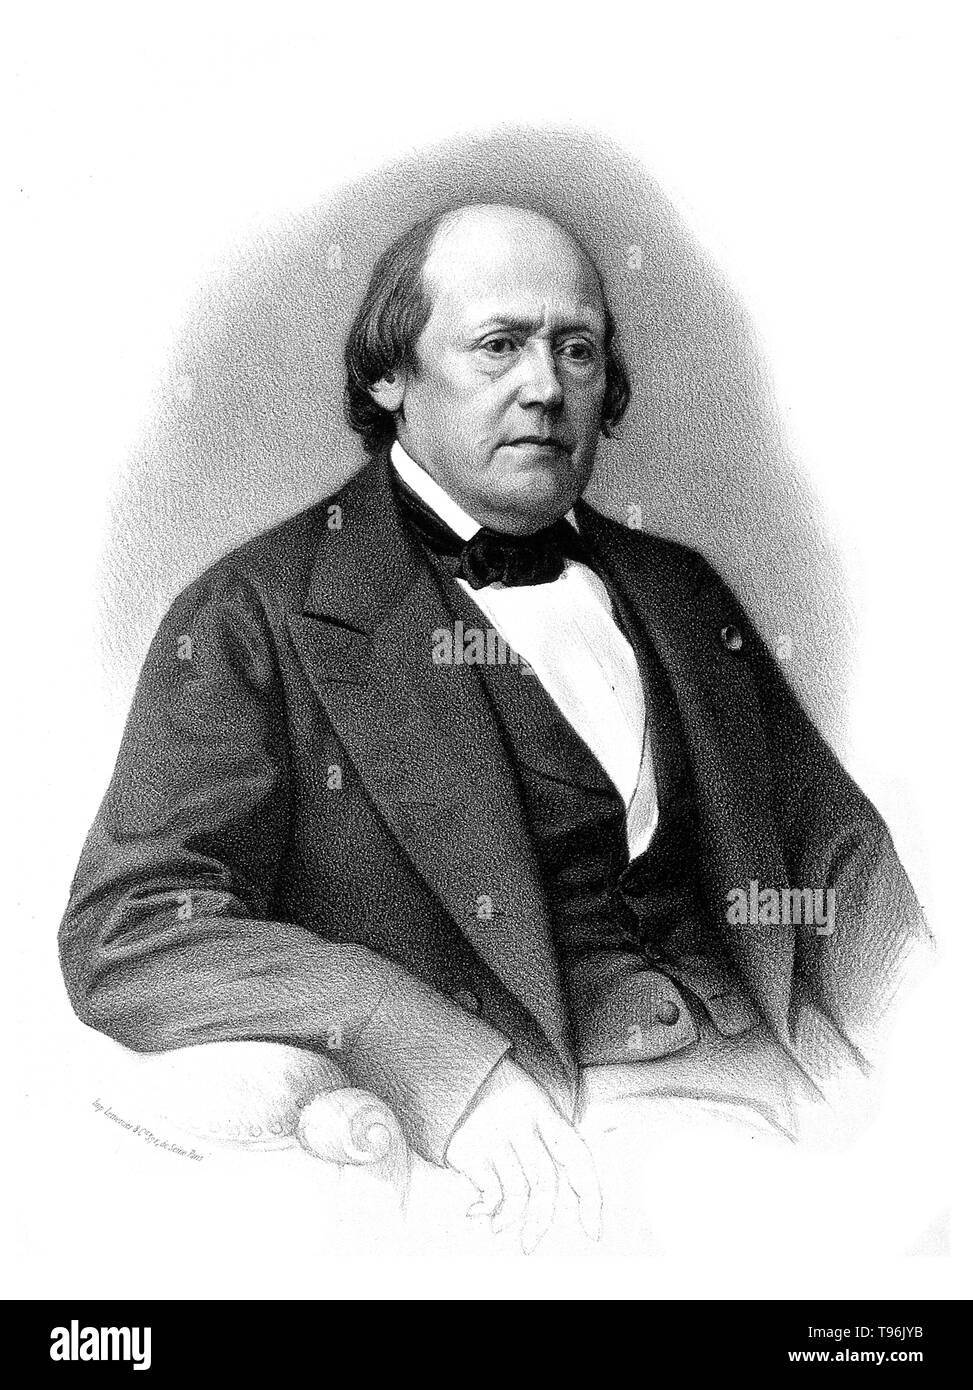 Henri Milne-Edwards (October 23, 1800 - July 29, 1885) was a French zoologist. At first he turned his attention to medicine, in which he graduated as an MD at Paris in 1823. His passion for natural history soon prevailed, and he gave himself up to the study of the lower forms of animal life. He became a student of Georges Cuvier and befriended Jean Victor Audouin. He became professor of hygiene and natural history in 1832 at the Collège Central des Arts et Manufactures. Stock Photo